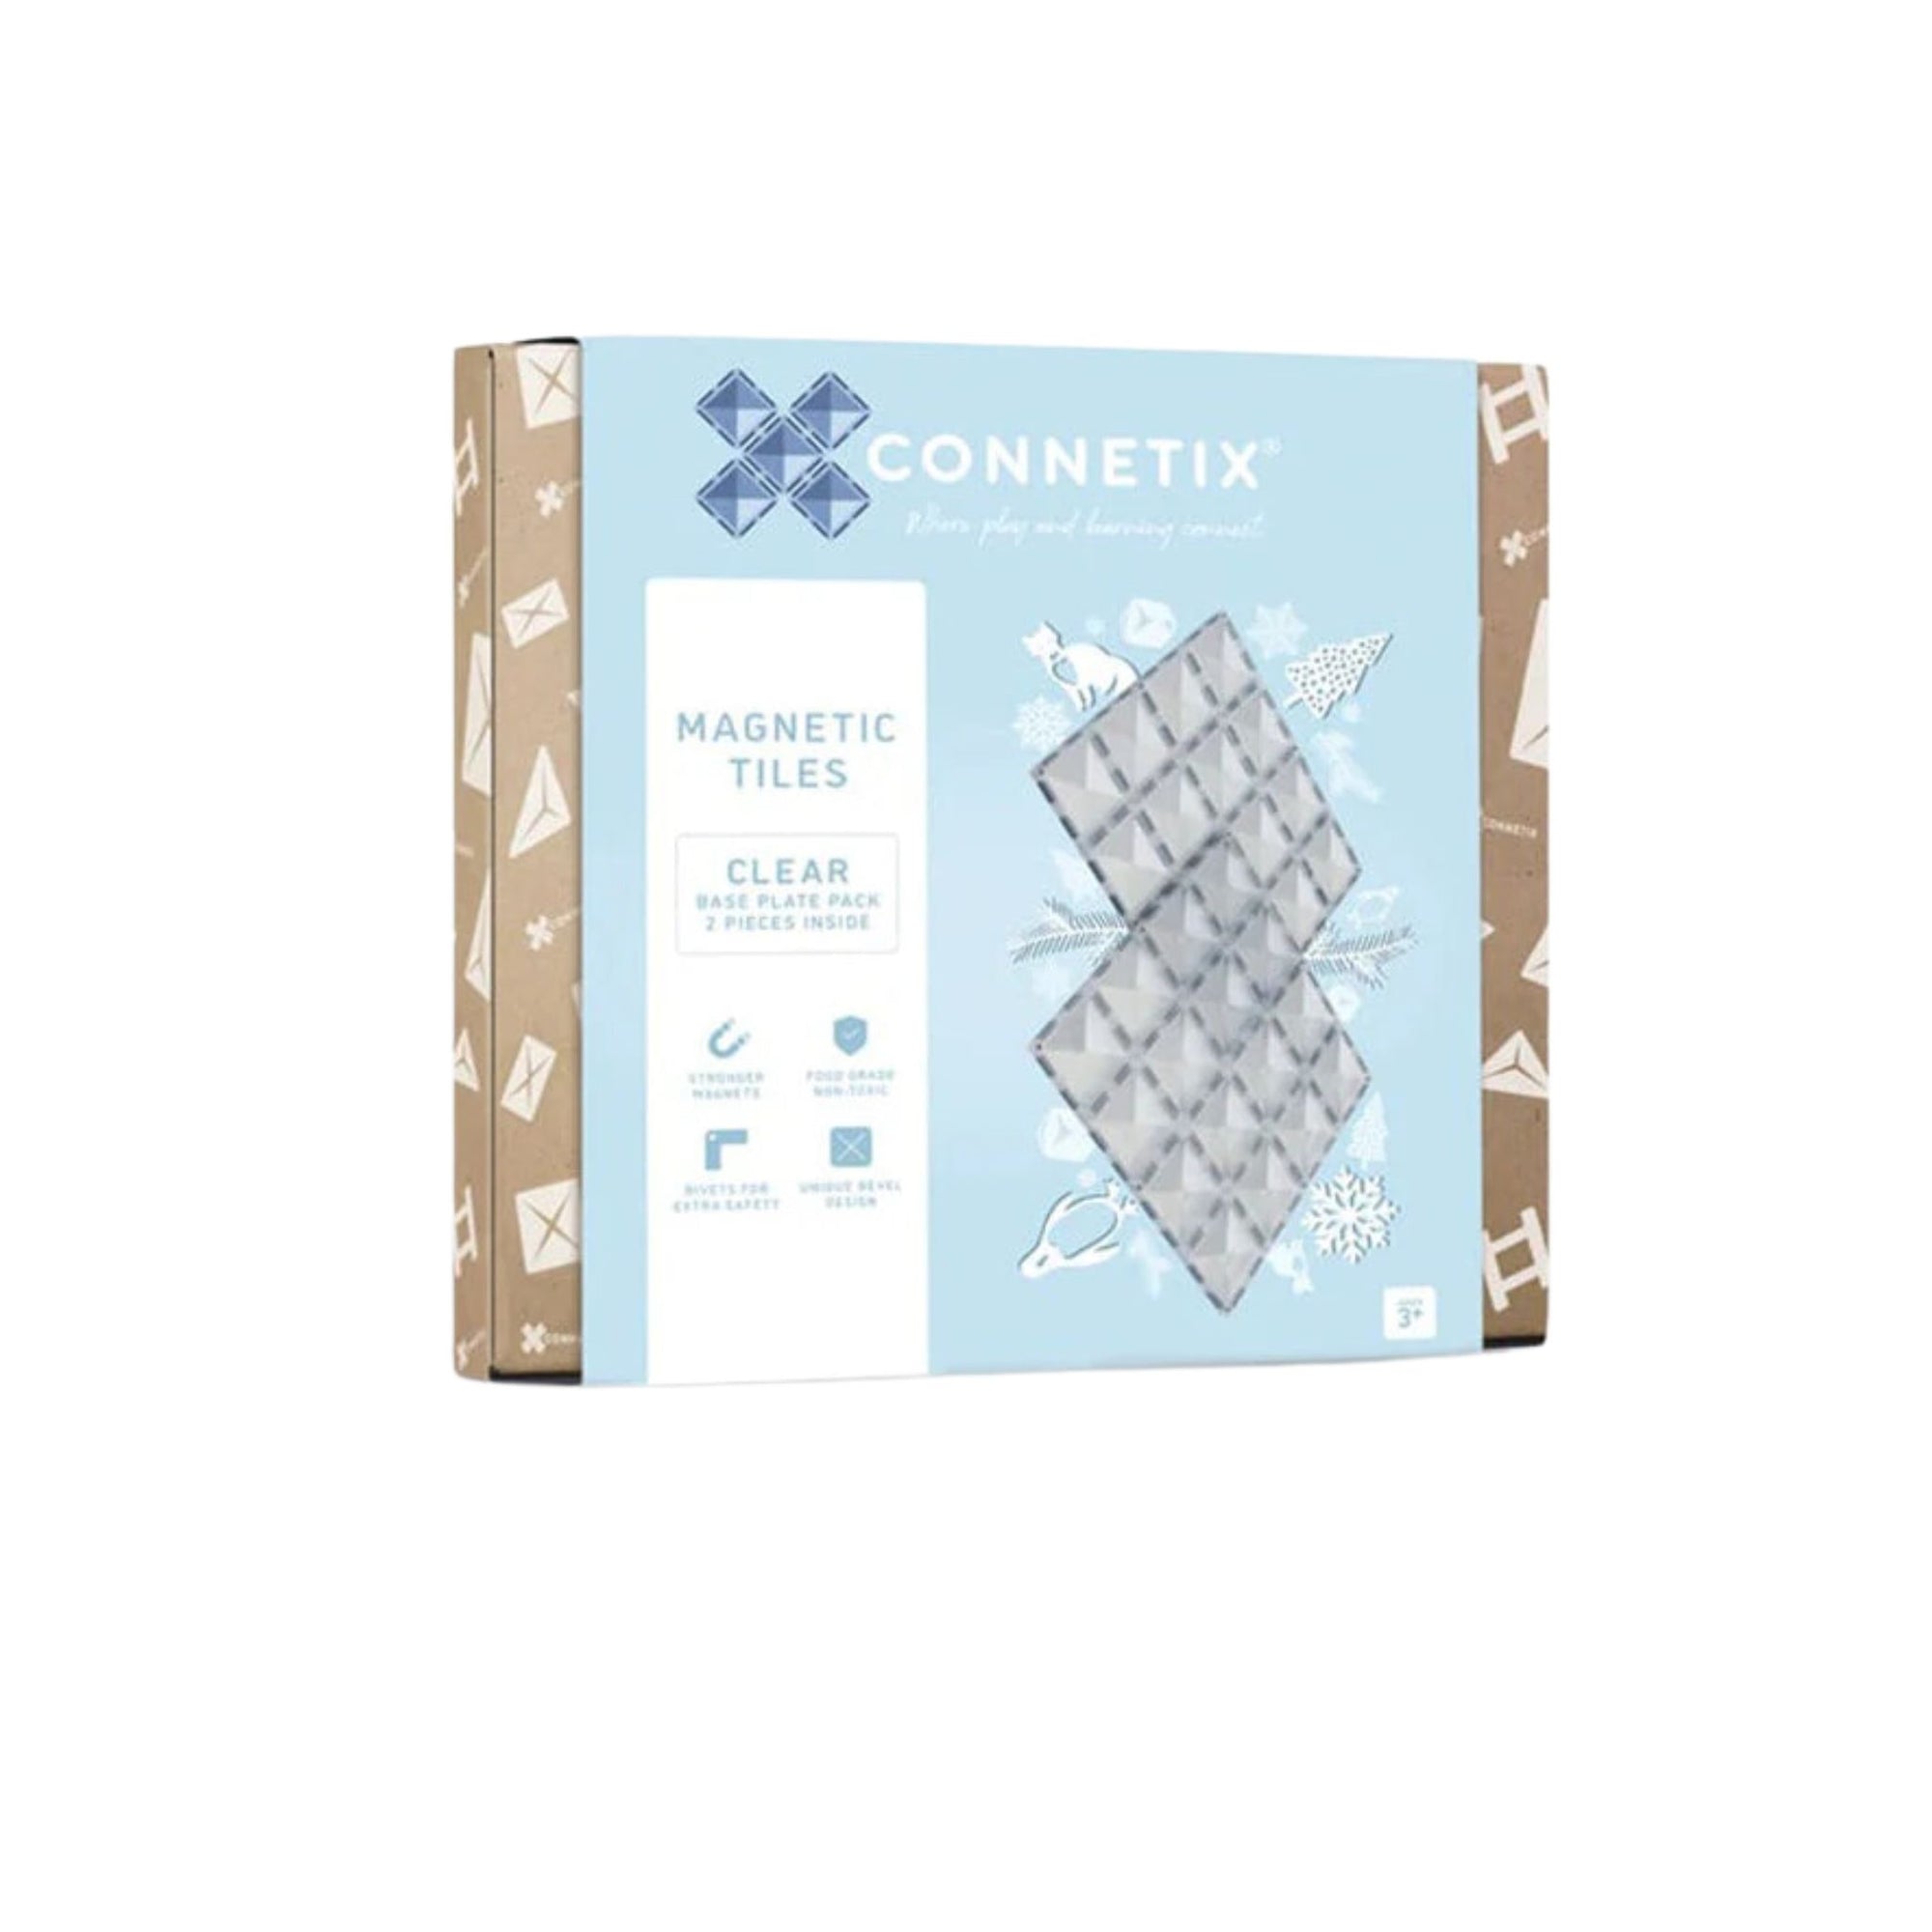 Connetix 2-Piece Clear Base Plate Pack